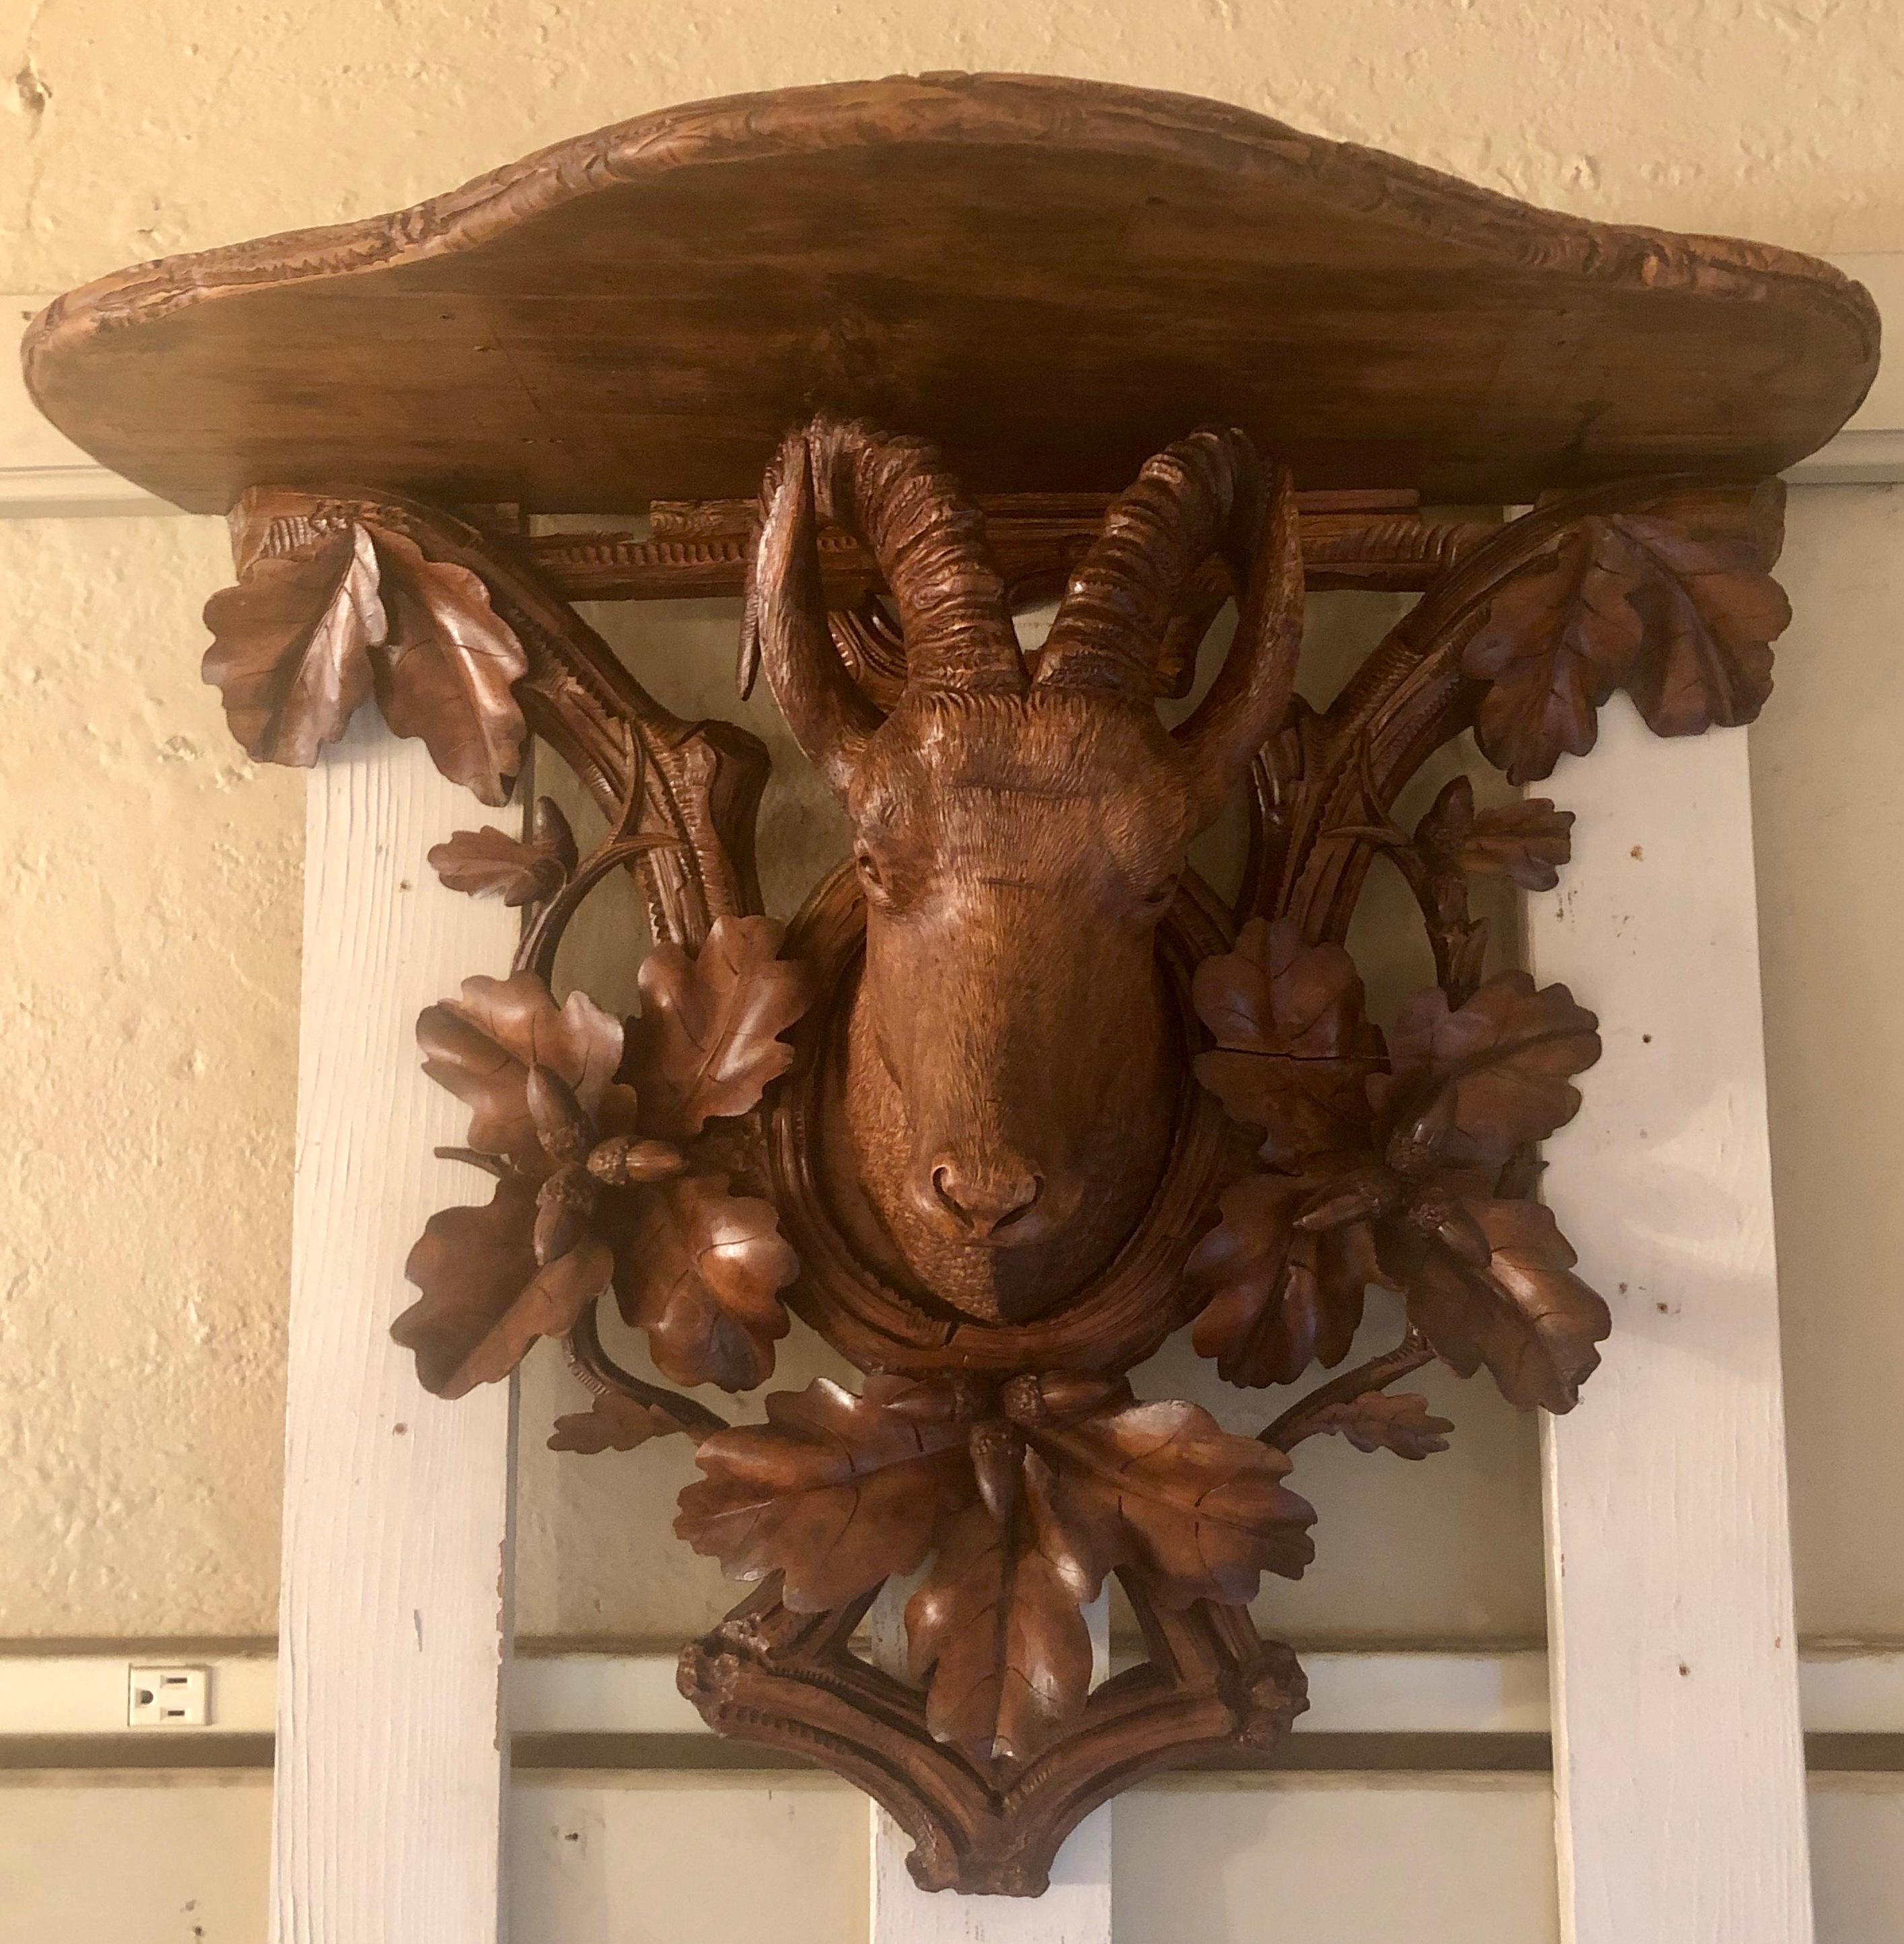 Antique German black forest walnut-carved shelf, circa 1890-1900.
Group photo: Pair smaller wall brackets listed separately.